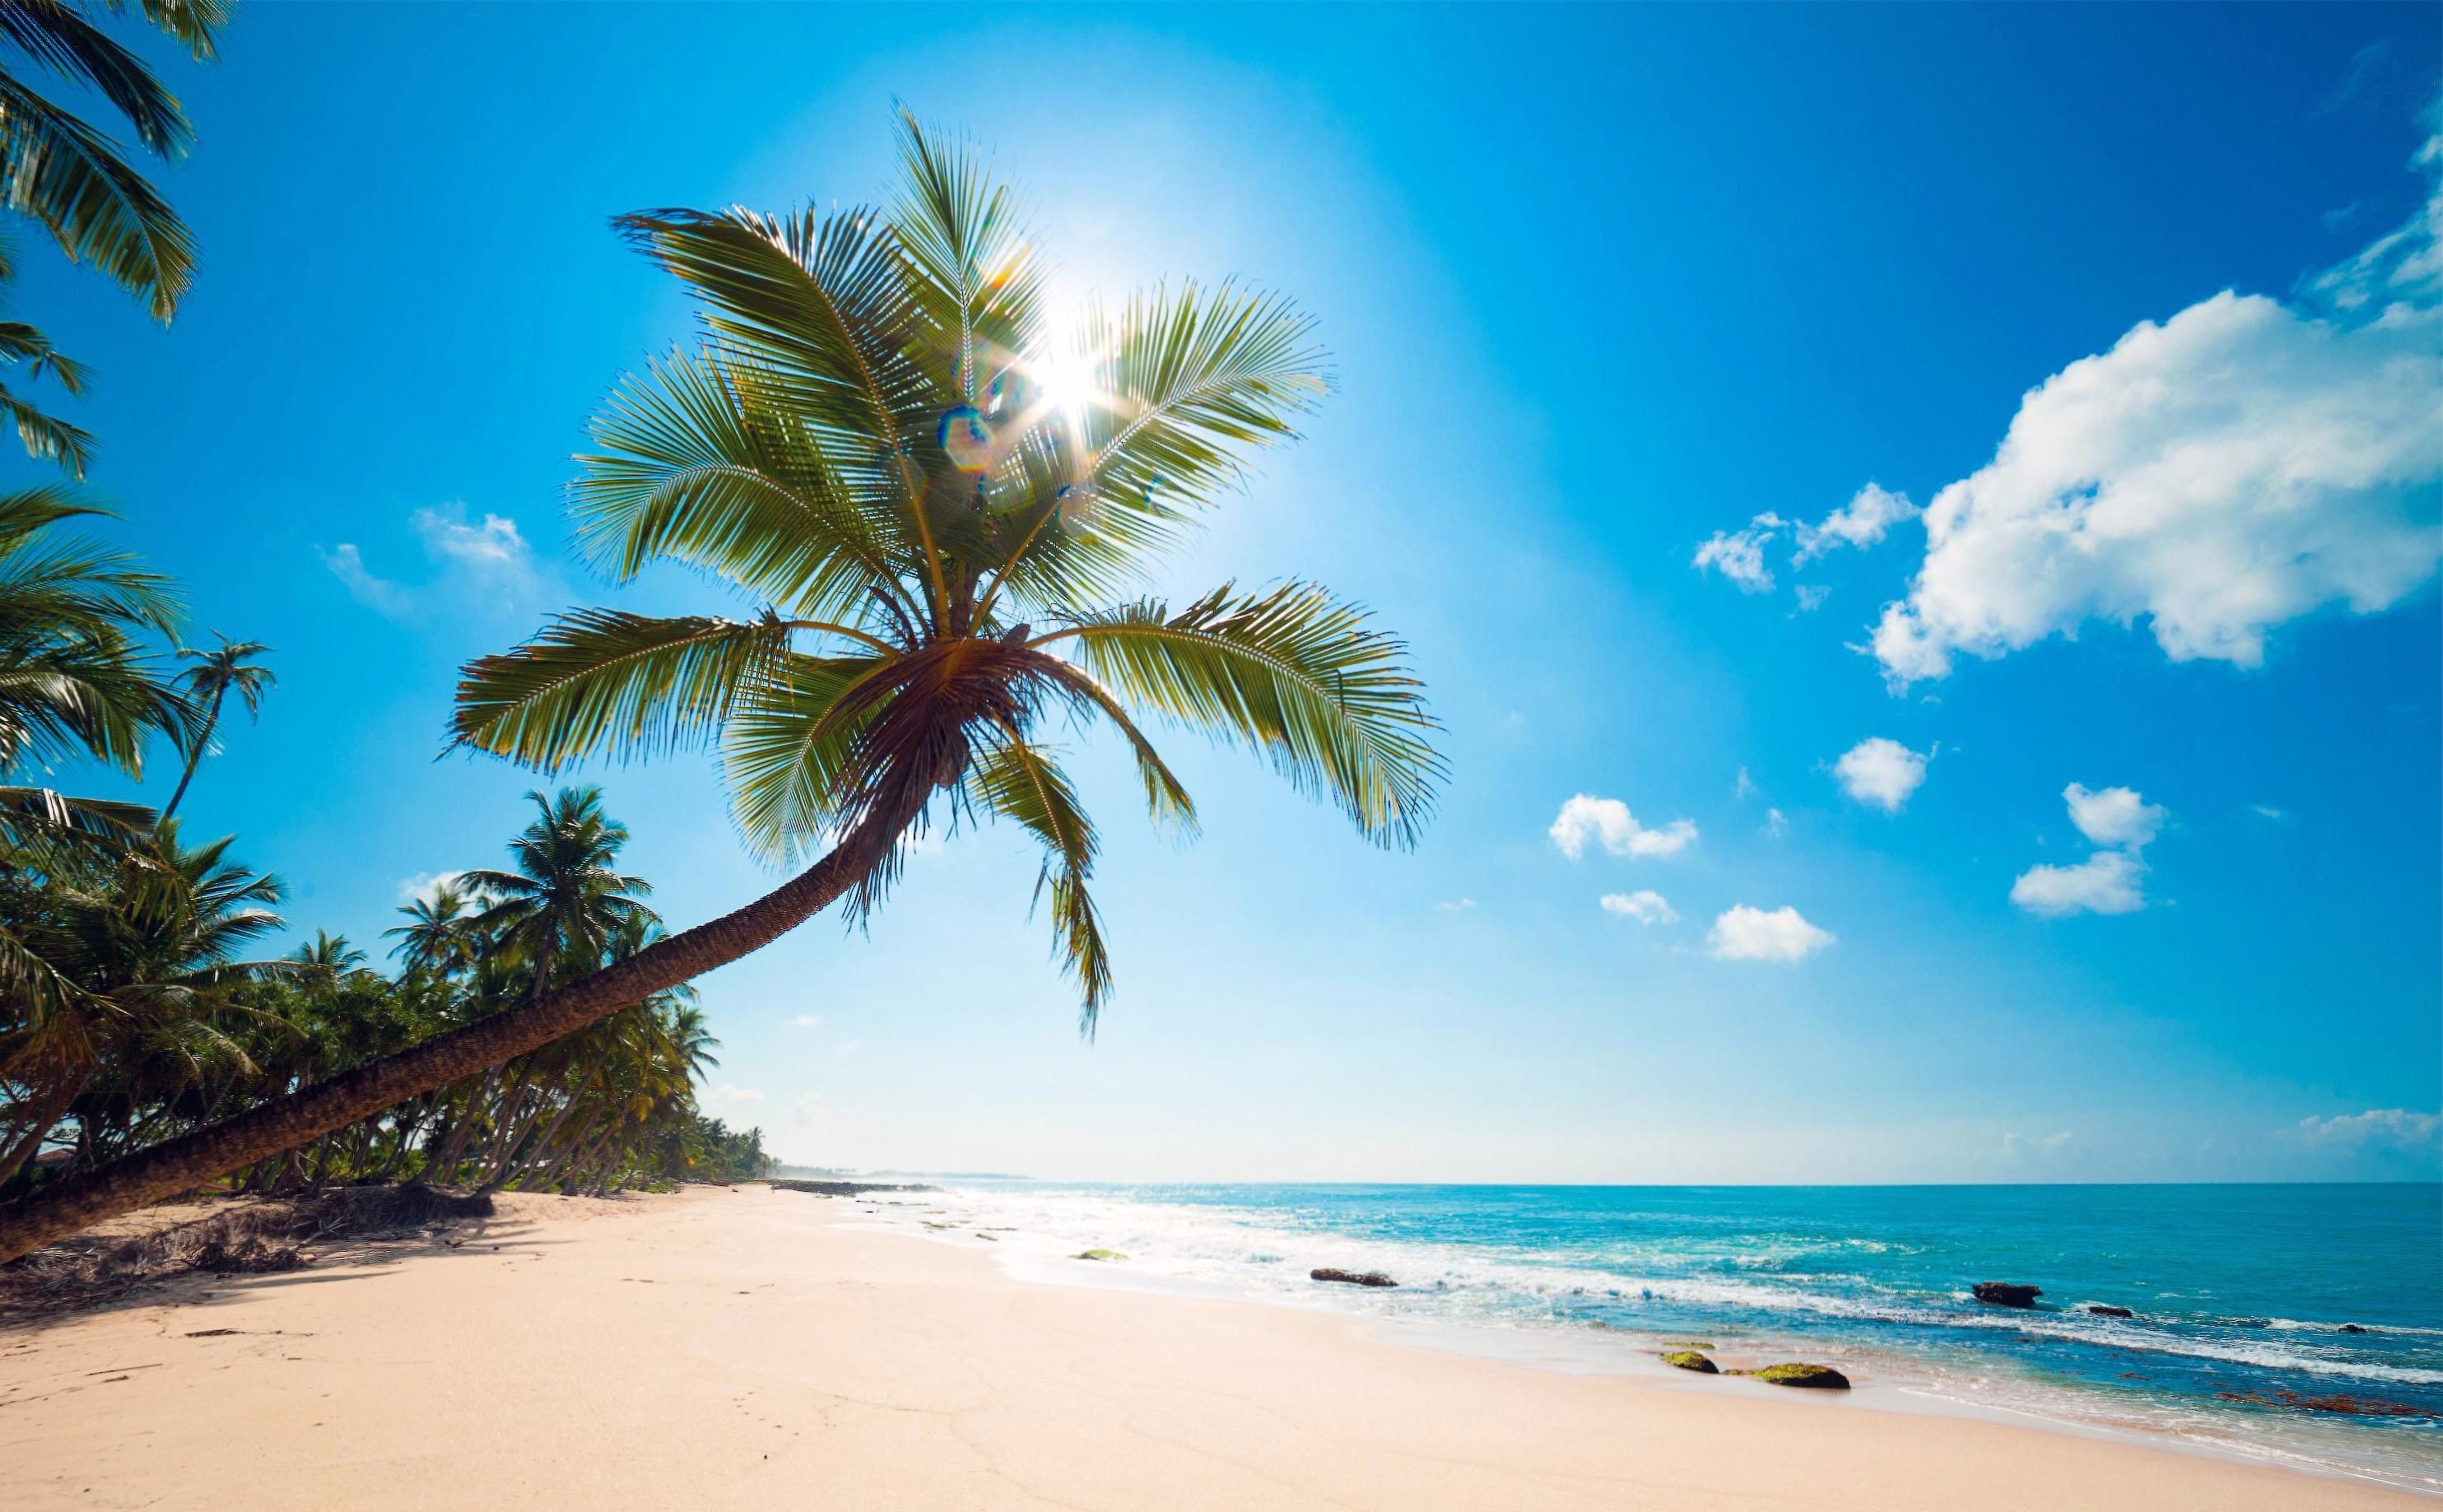 2968x1837, Sunny Beach Hd Wallpapers - Ocean And Palm Trees - HD Wallpaper 